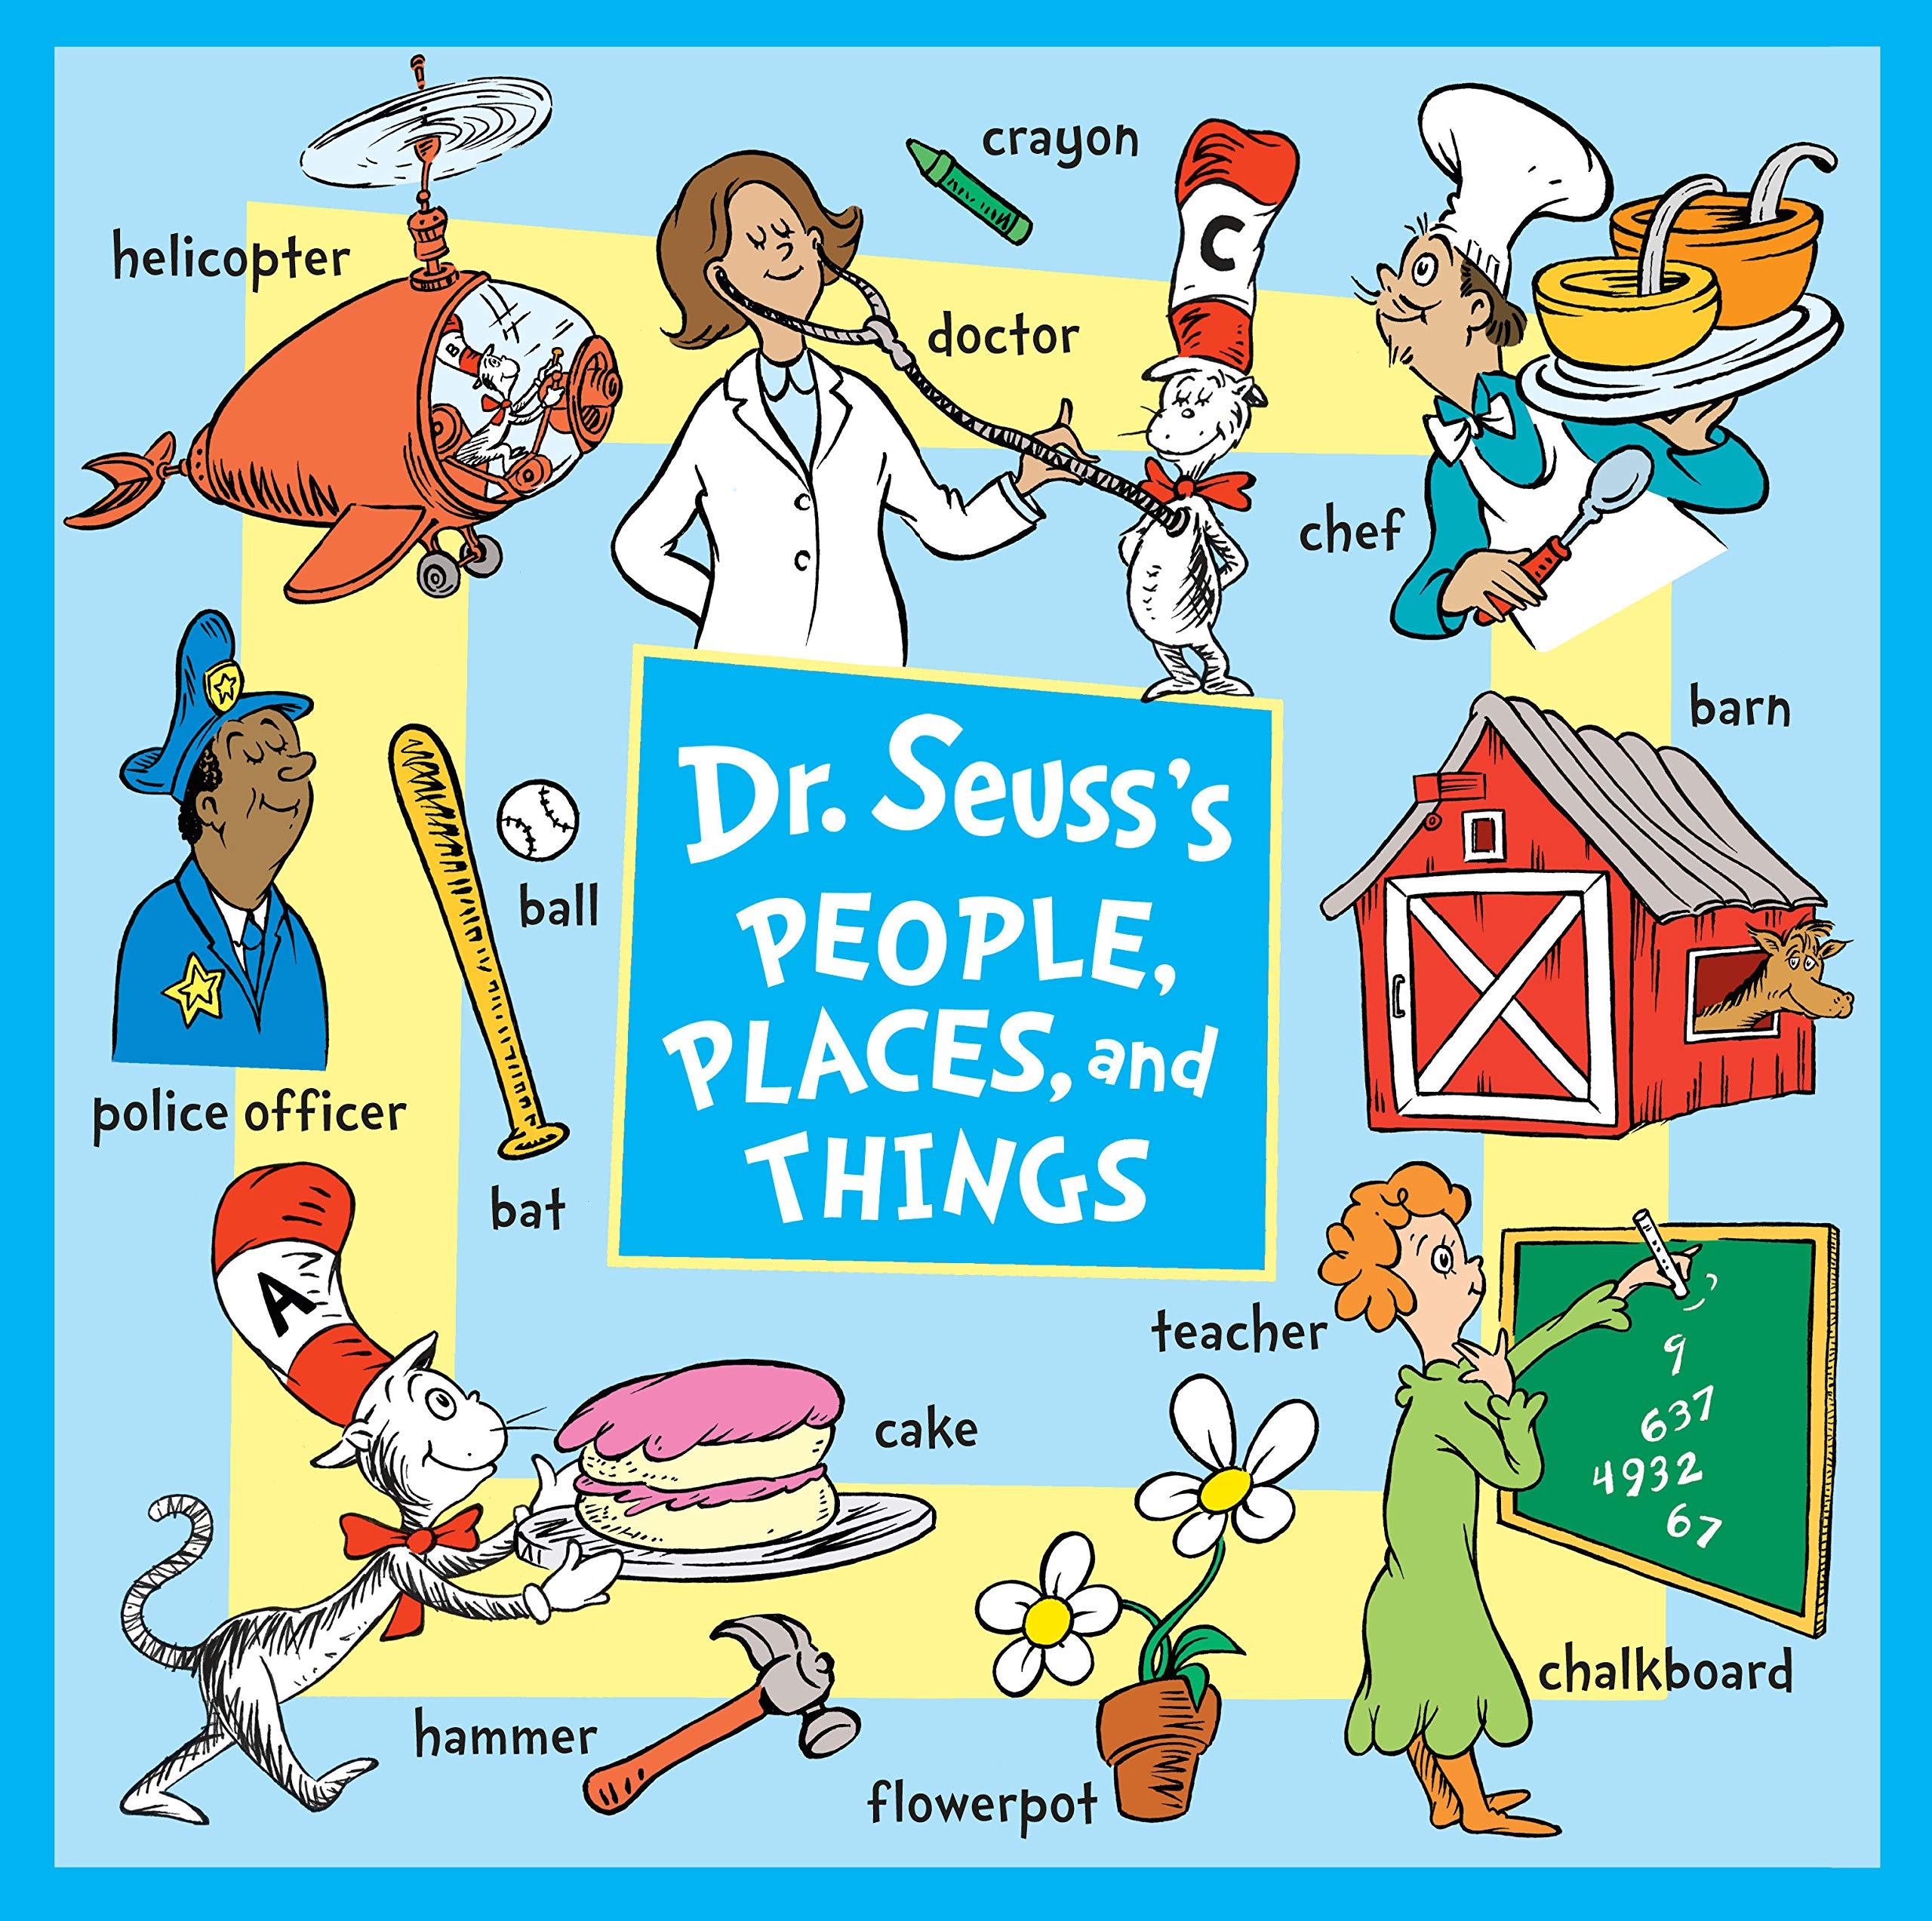 Dr. Seuss's People, Places, and Things